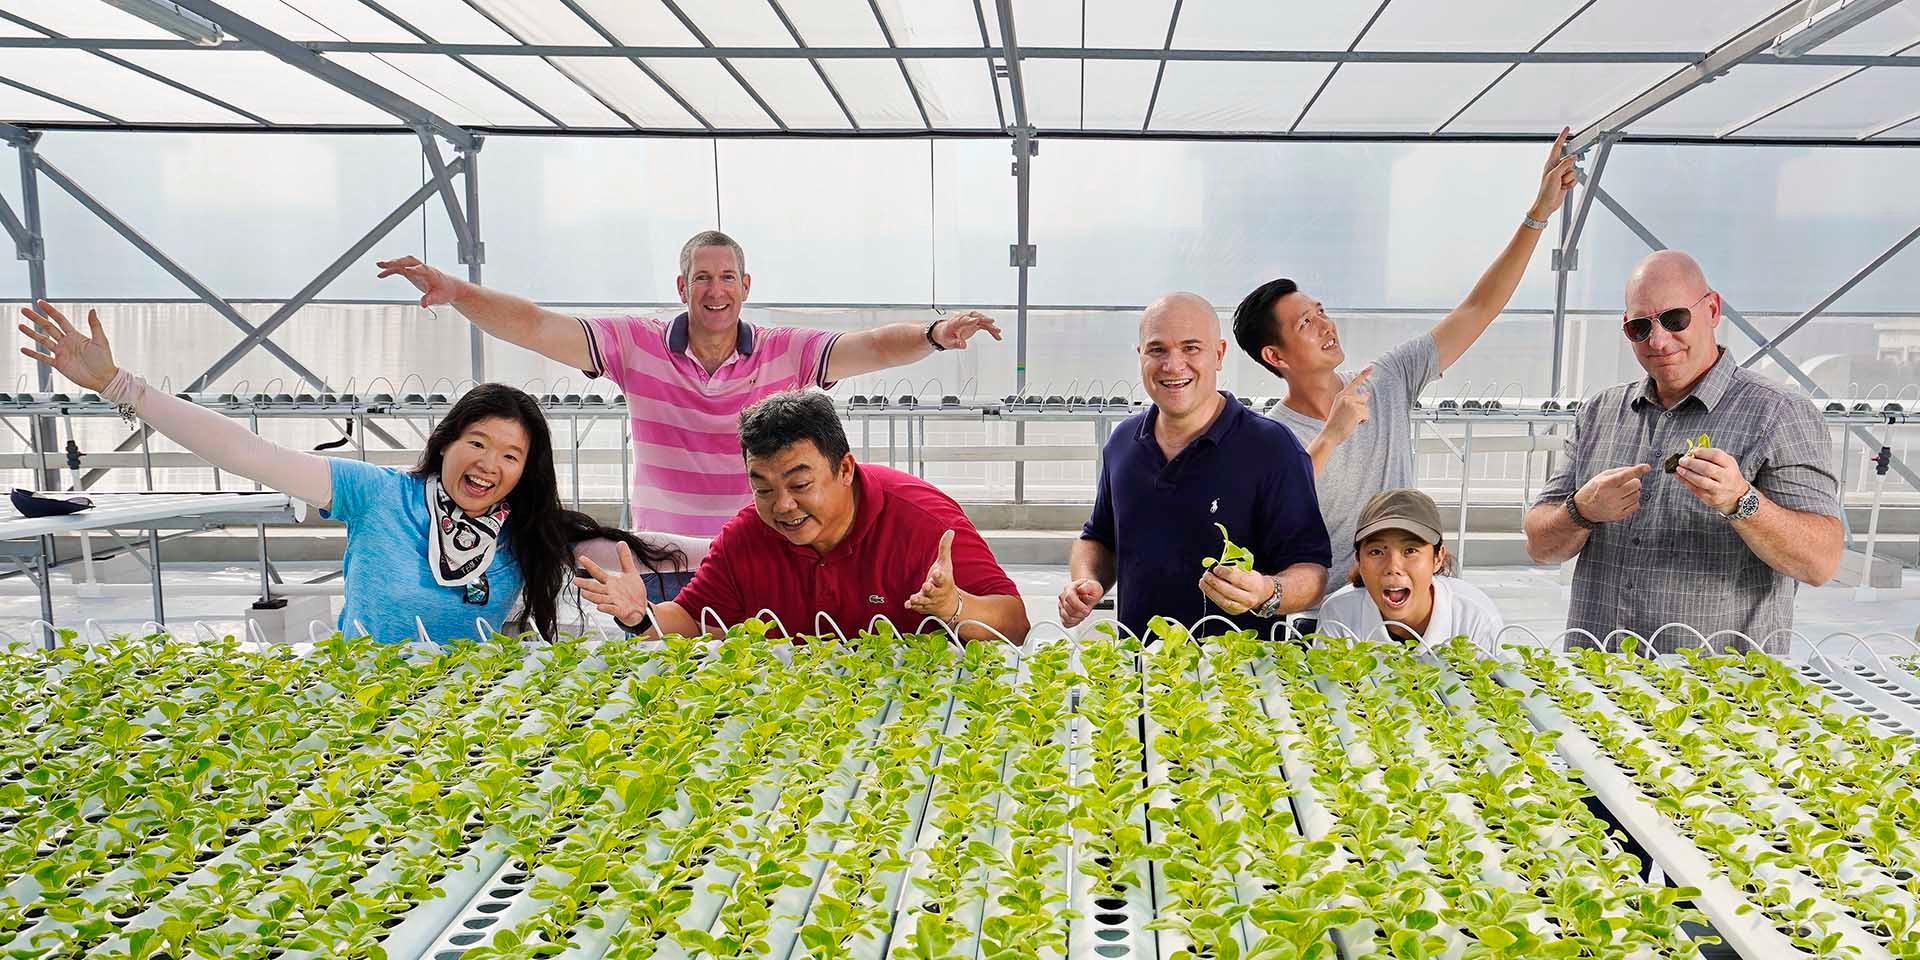 Team members of ComCrop gathered around their rooftop greenhouse